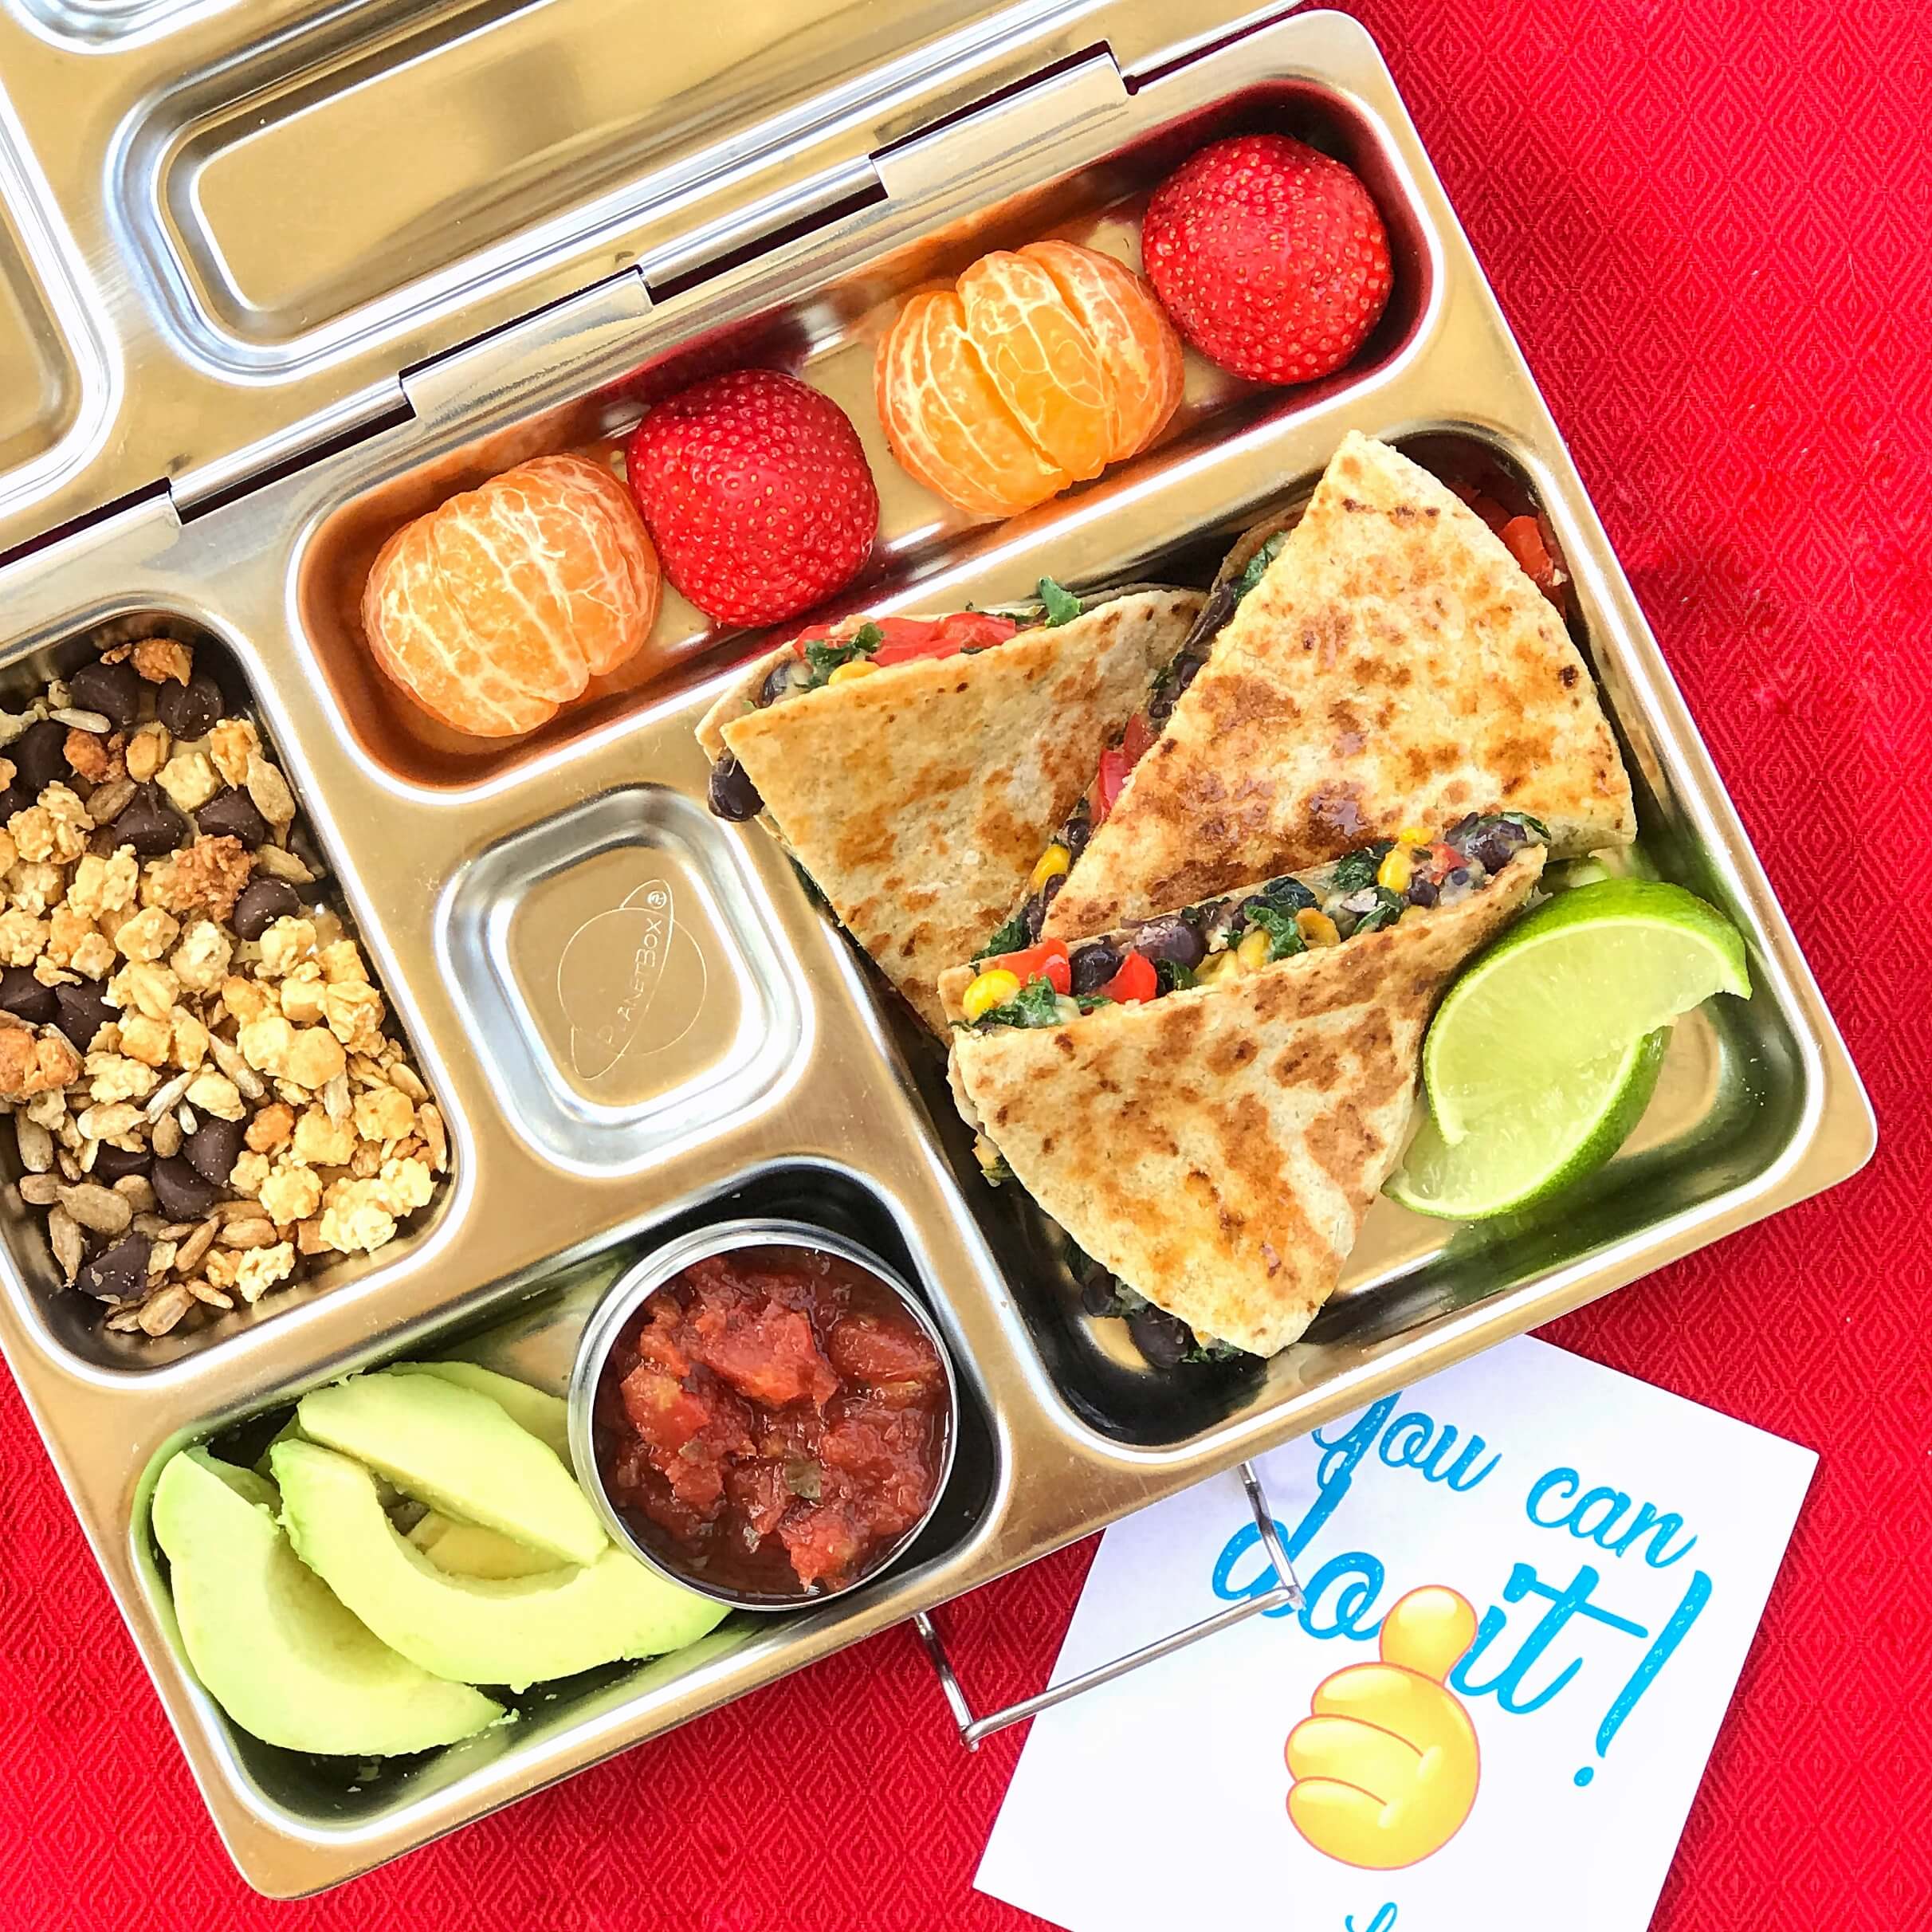 Fun and Healthy School Lunchbox Ideas - The BakerMama